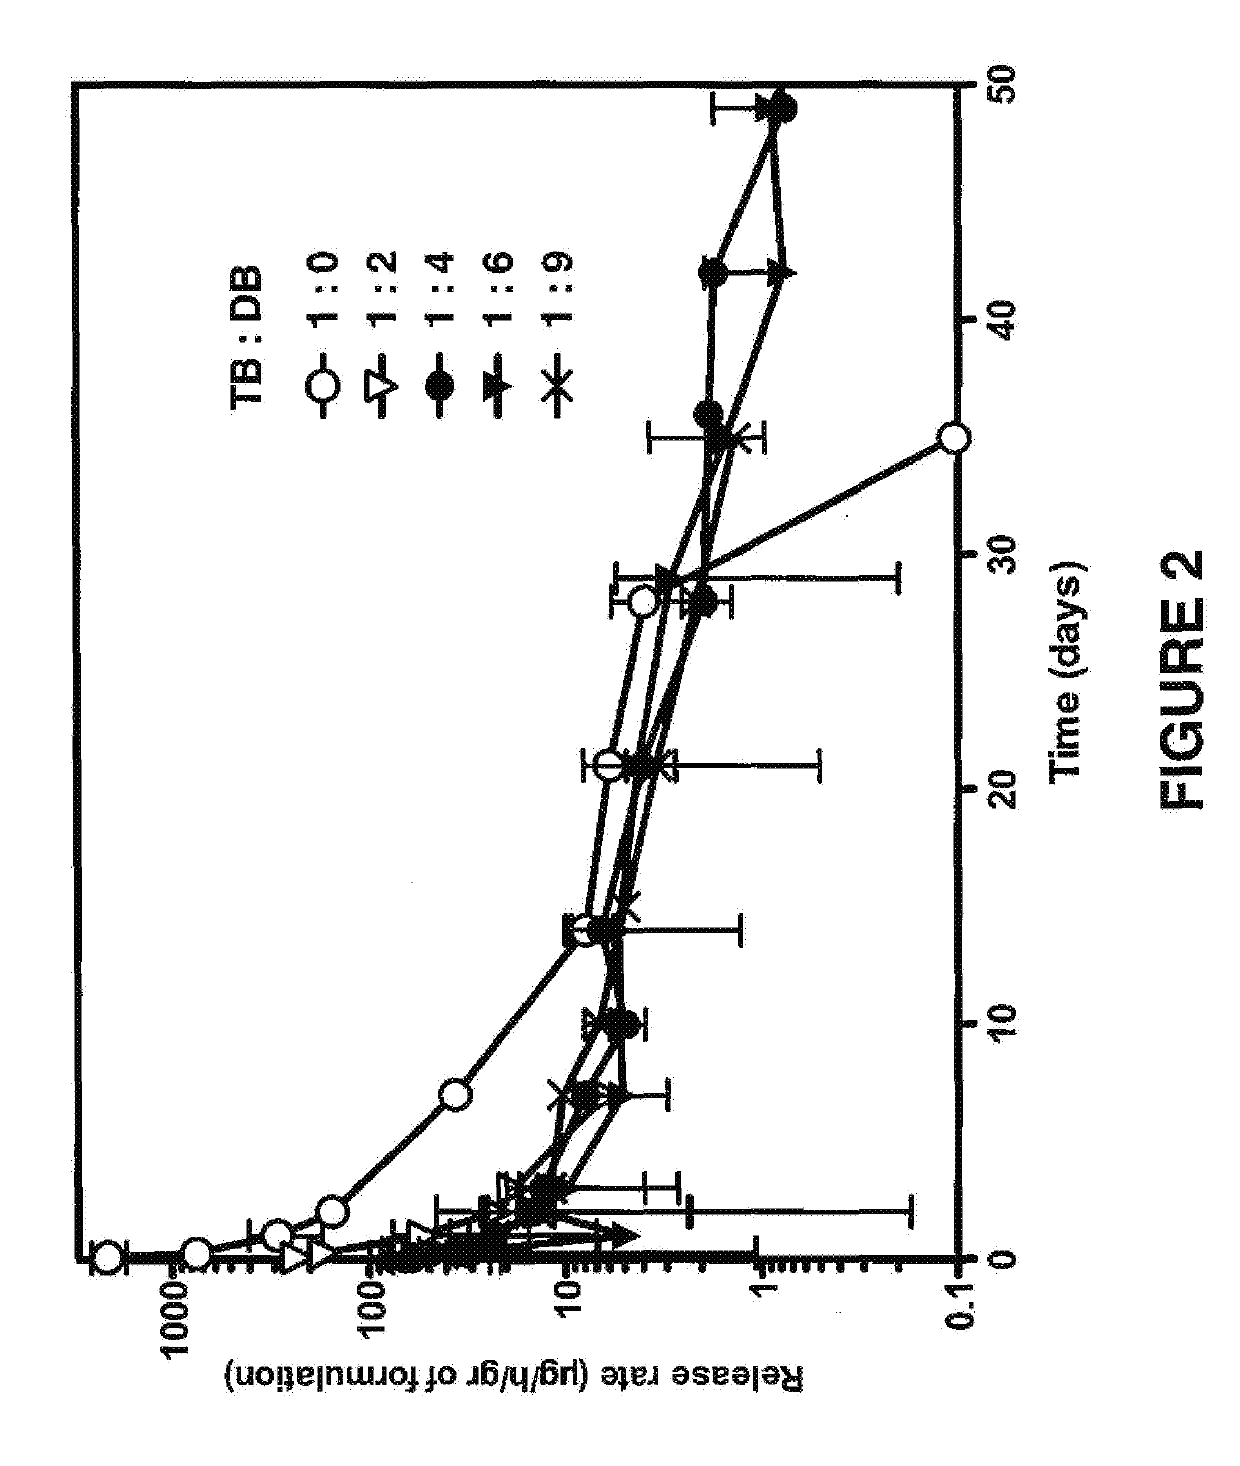 Biodegradable drug delivery for hydrophobic compositions